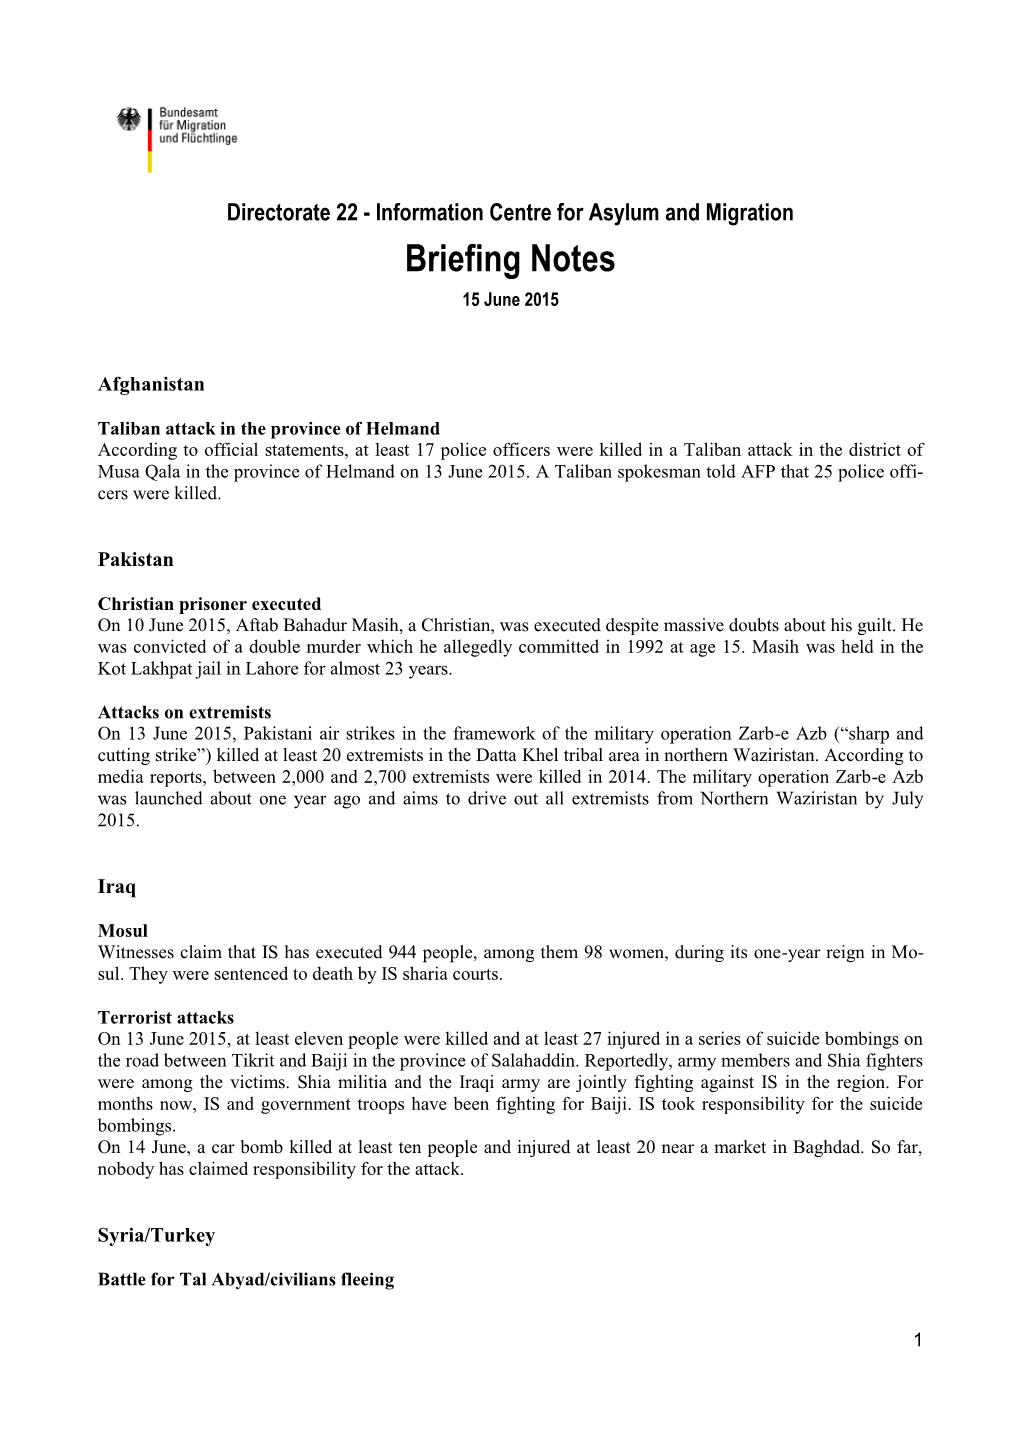 Briefing Notes 15 June 2015